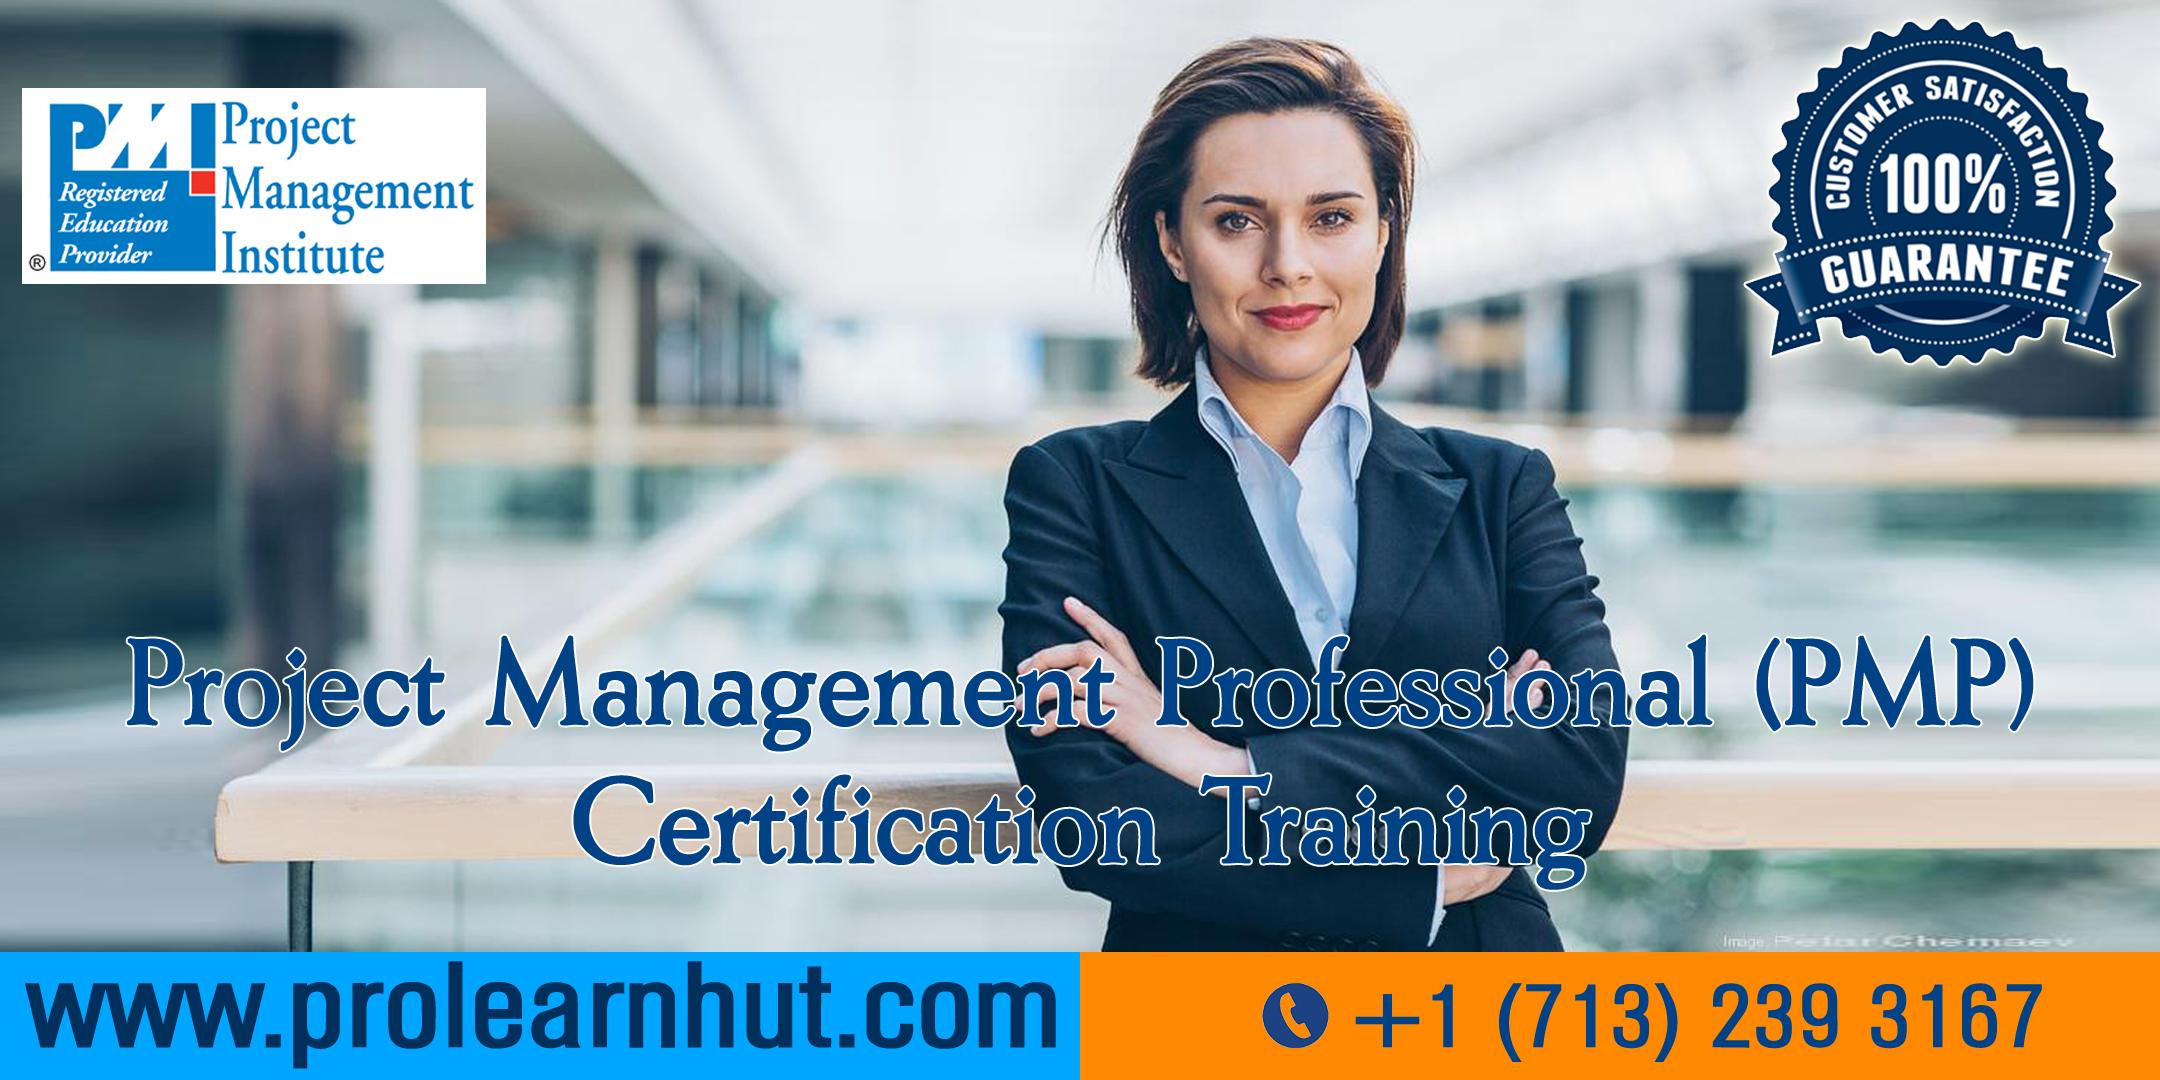 PMP Certification | Project Management Certification| PMP Training in Los Angeles, CA | ProLearnHut